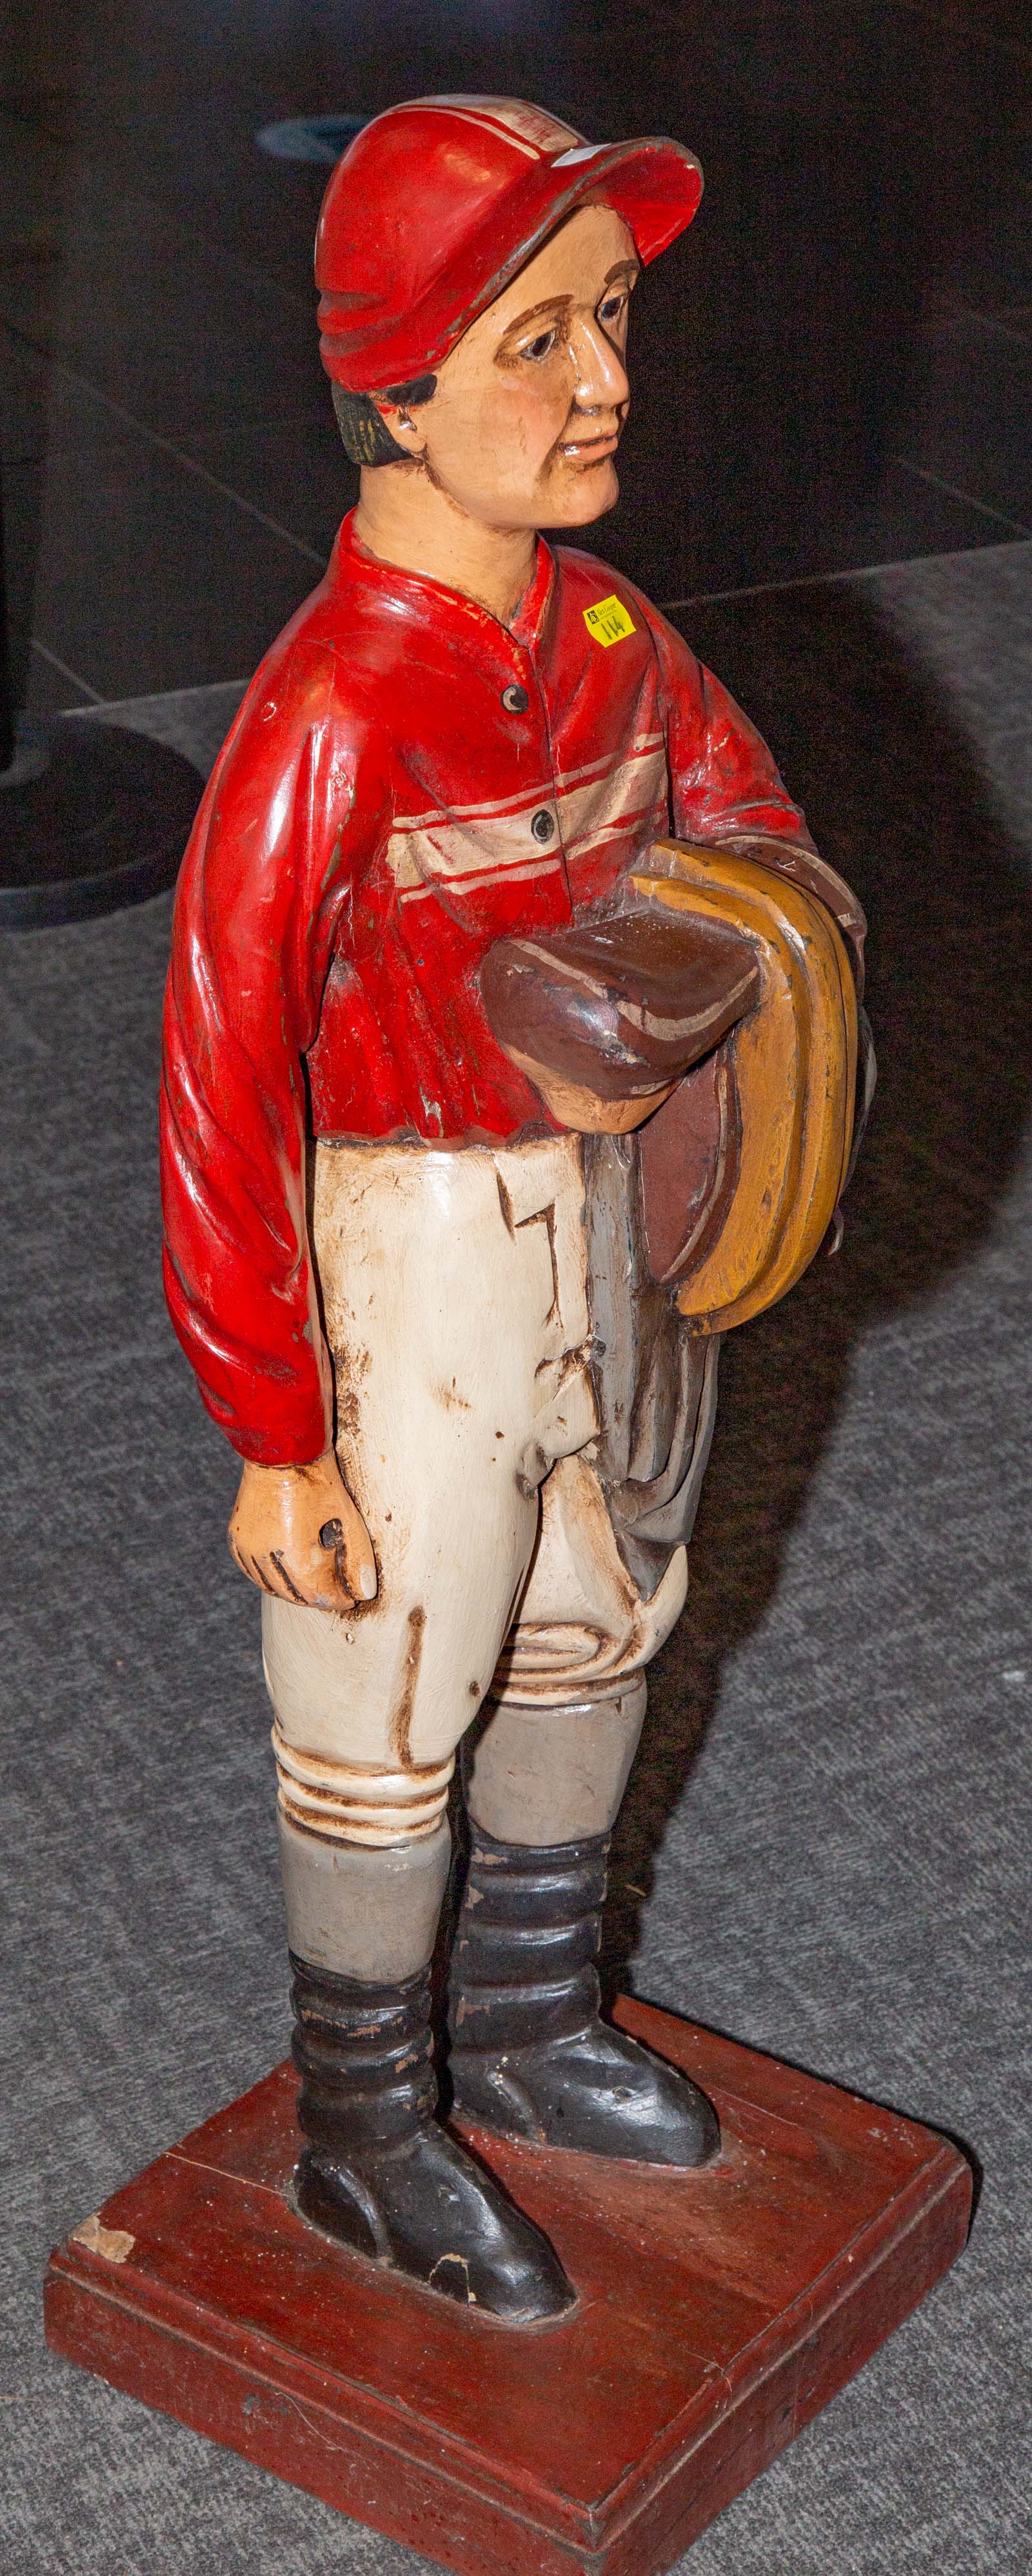 CARVED & PAINTED WOODEN JOCKEY